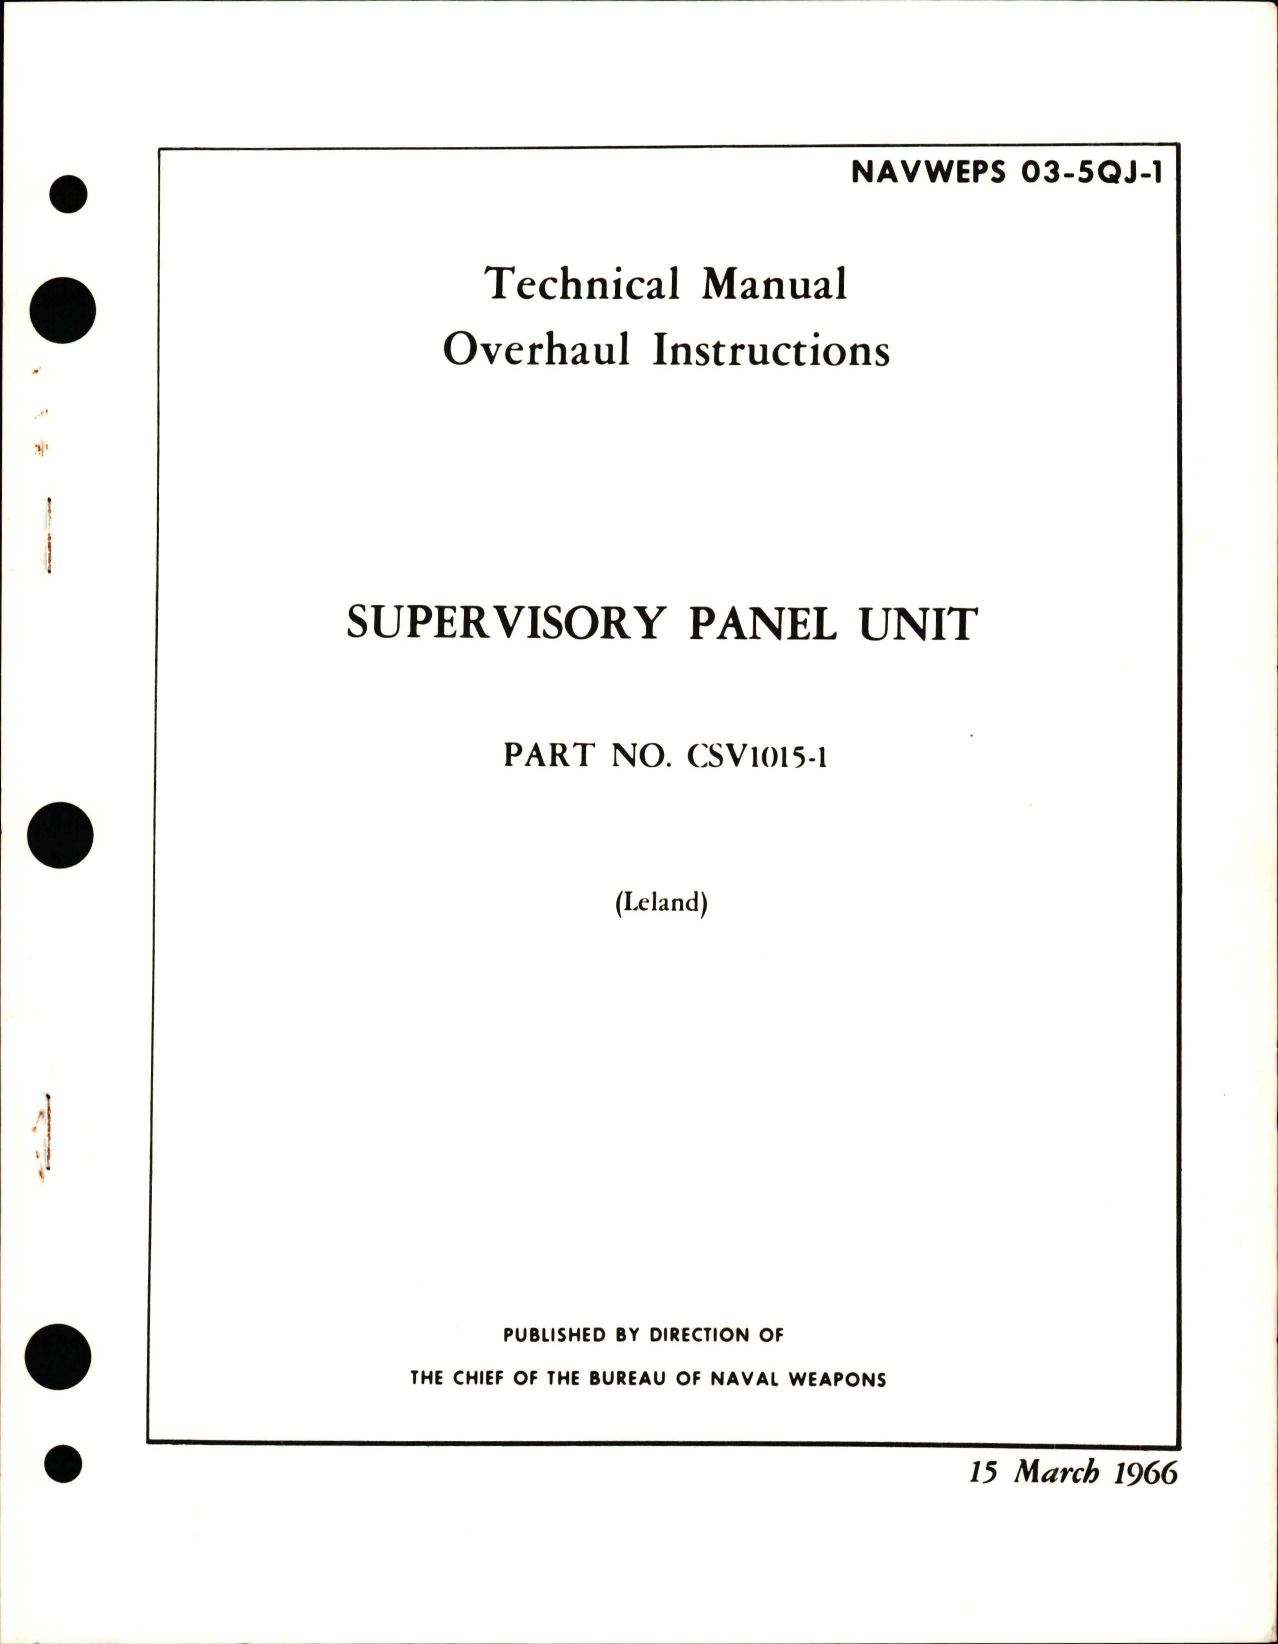 Sample page 1 from AirCorps Library document: Overhaul Instructions for Supervisory Panel Unit - Part CSV1015-1